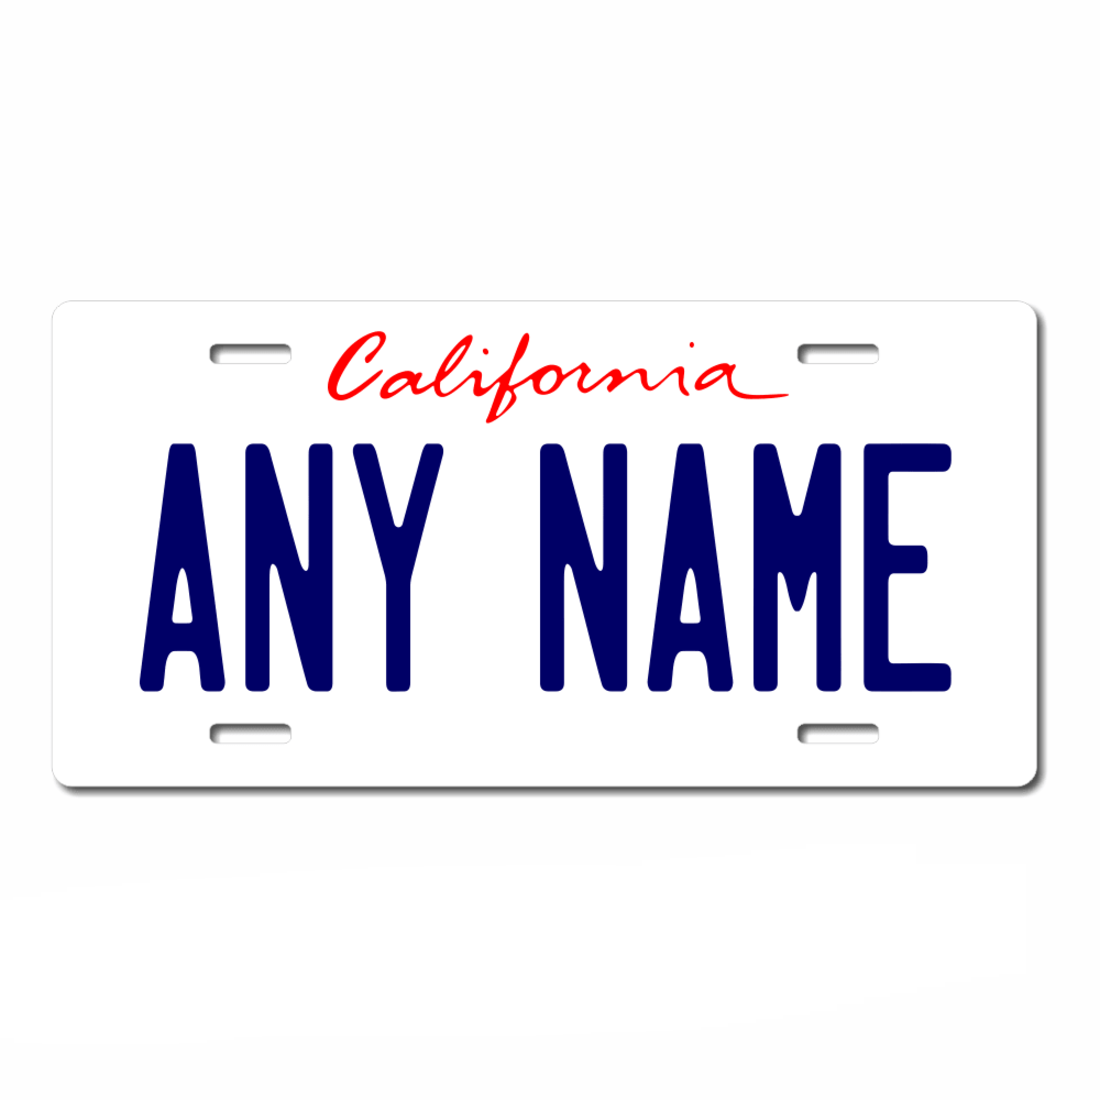 TEAMLOGO Personalized California License Plate Size 3 X 6 ALUMINUM LICENSE PLATE Version 2 